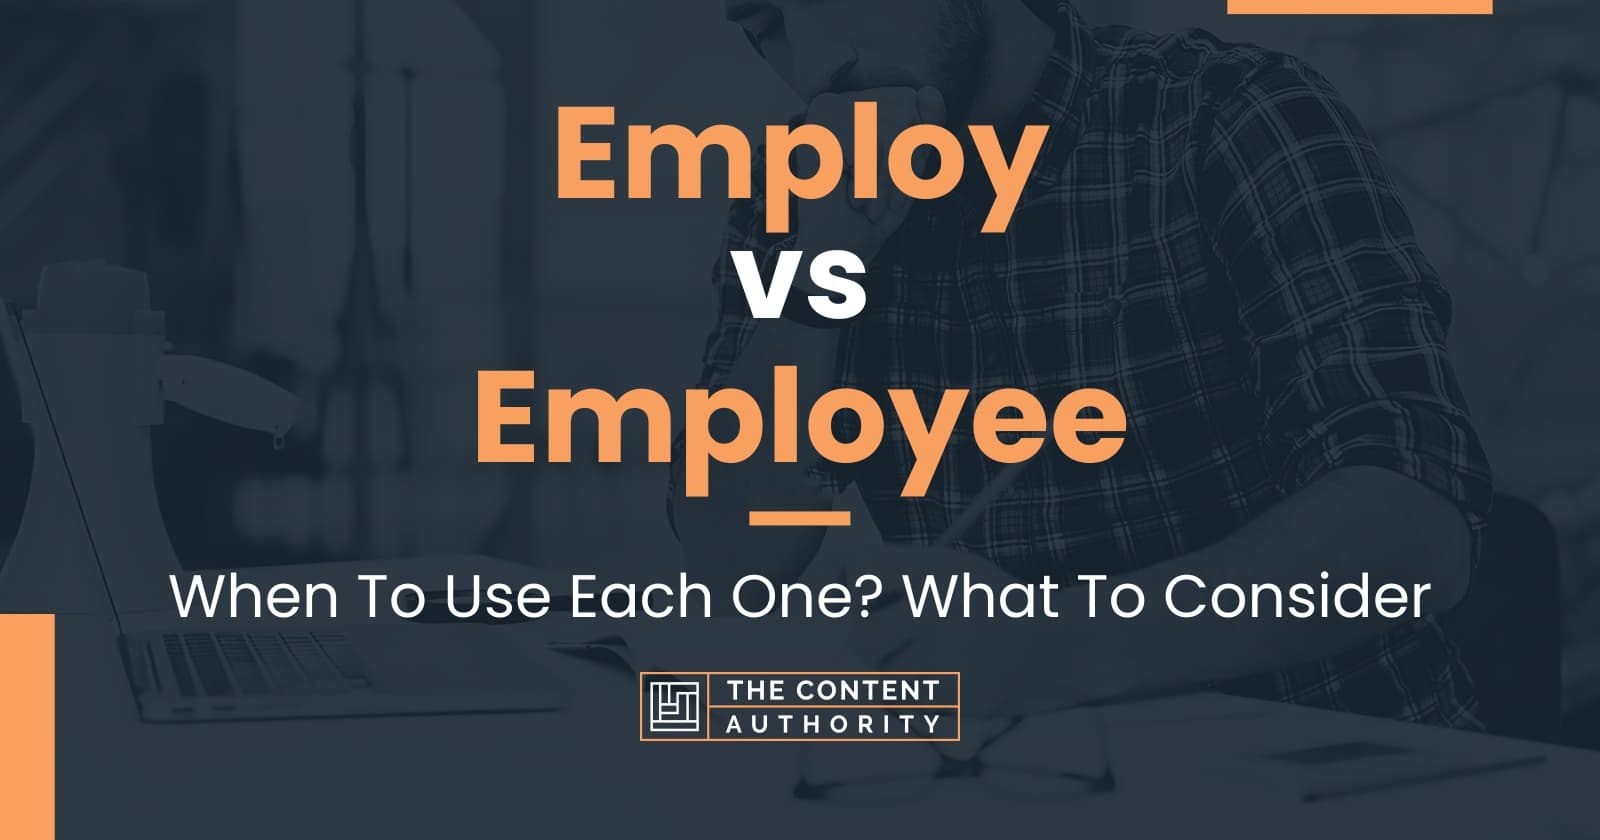 Employ vs Employee: When To Use Each One? What To Consider